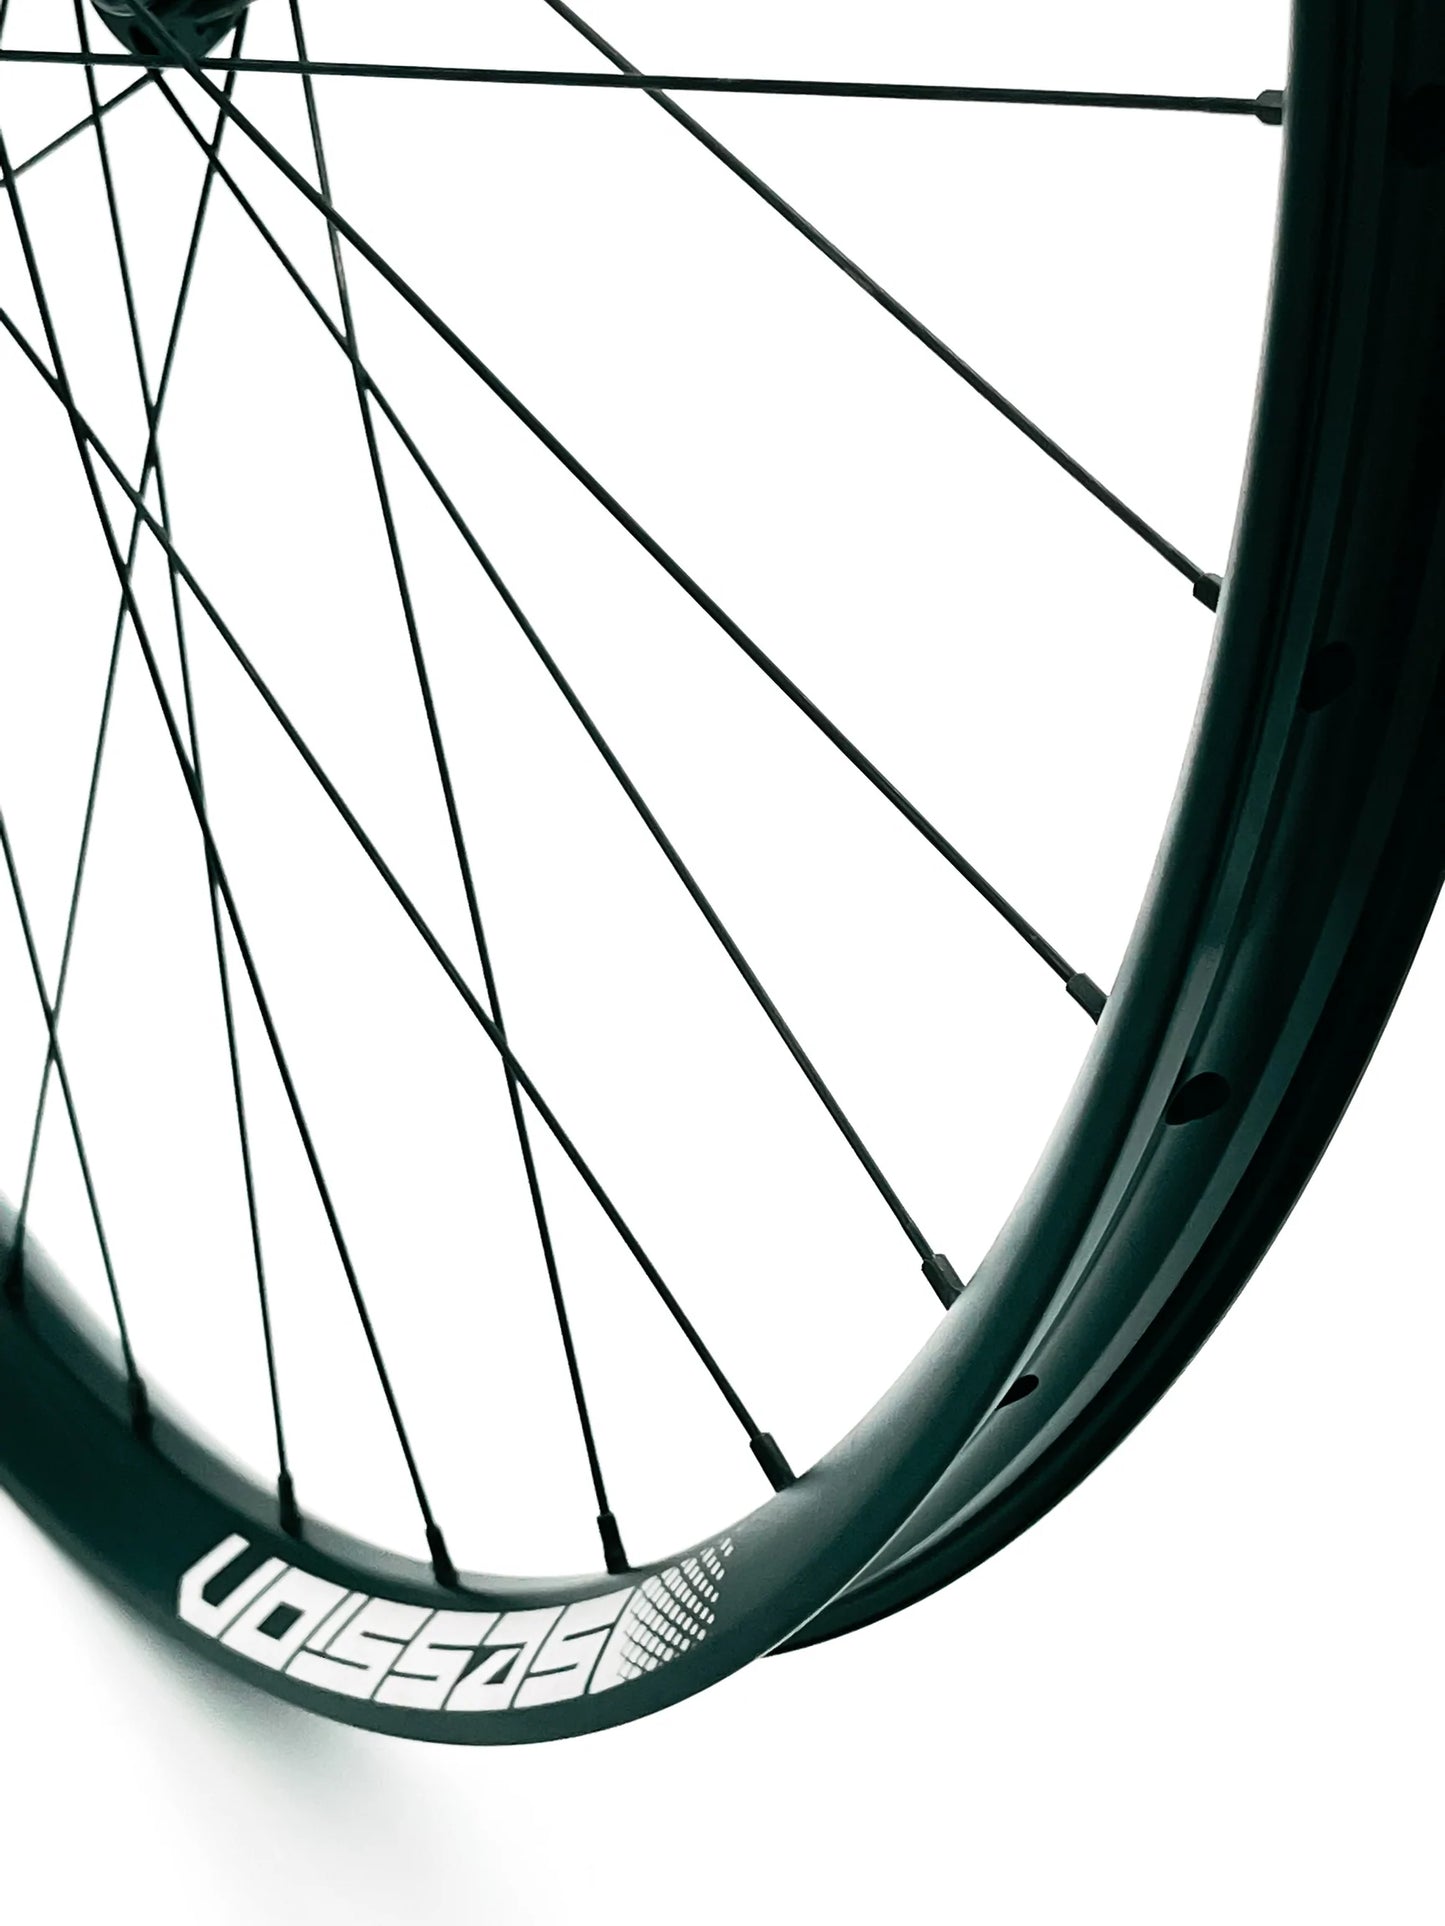 Session Components A38 Wheelset 29" 15x110 Front - 12x148 Rear XD